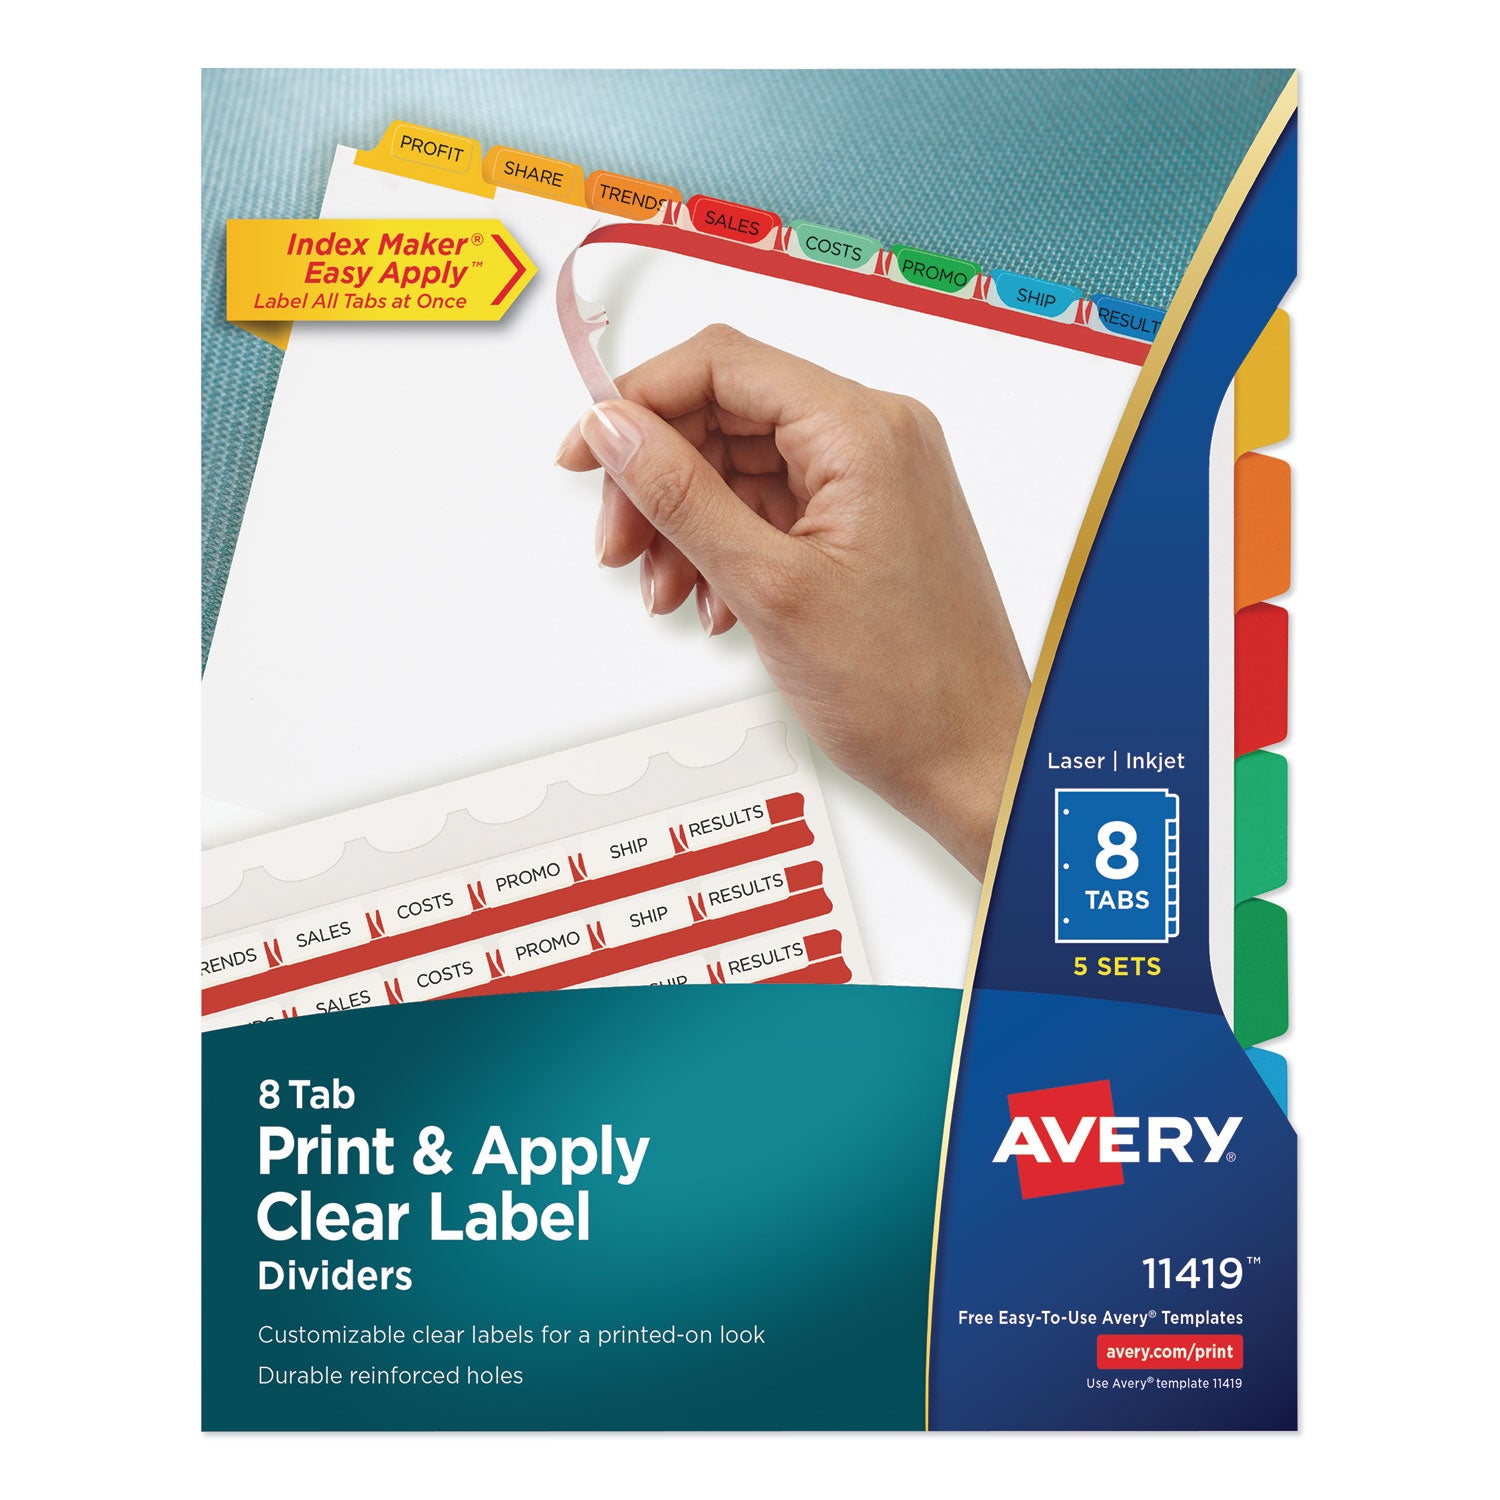 Print and Apply Index Maker Clear Label Dividers, 8-Tab, Color Tabs, 11 x 8.5, White, Traditional Color Tabs, 5 Sets - 